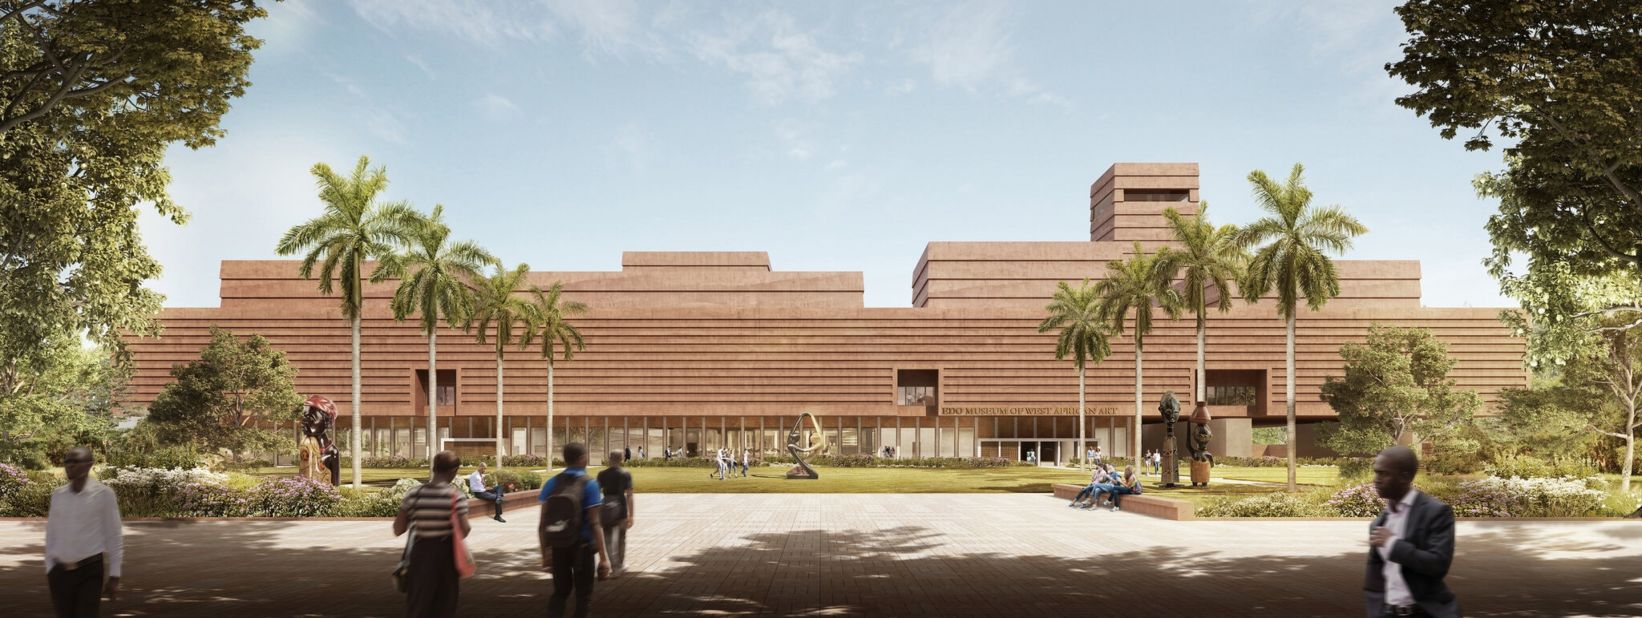 The Nigerian government and Royal Court of Benin is negotiating the return of bronzes from European museums on a temporary or permanent basis for the new Edo Museum of West African Art, designed by architect David Adjaye. 